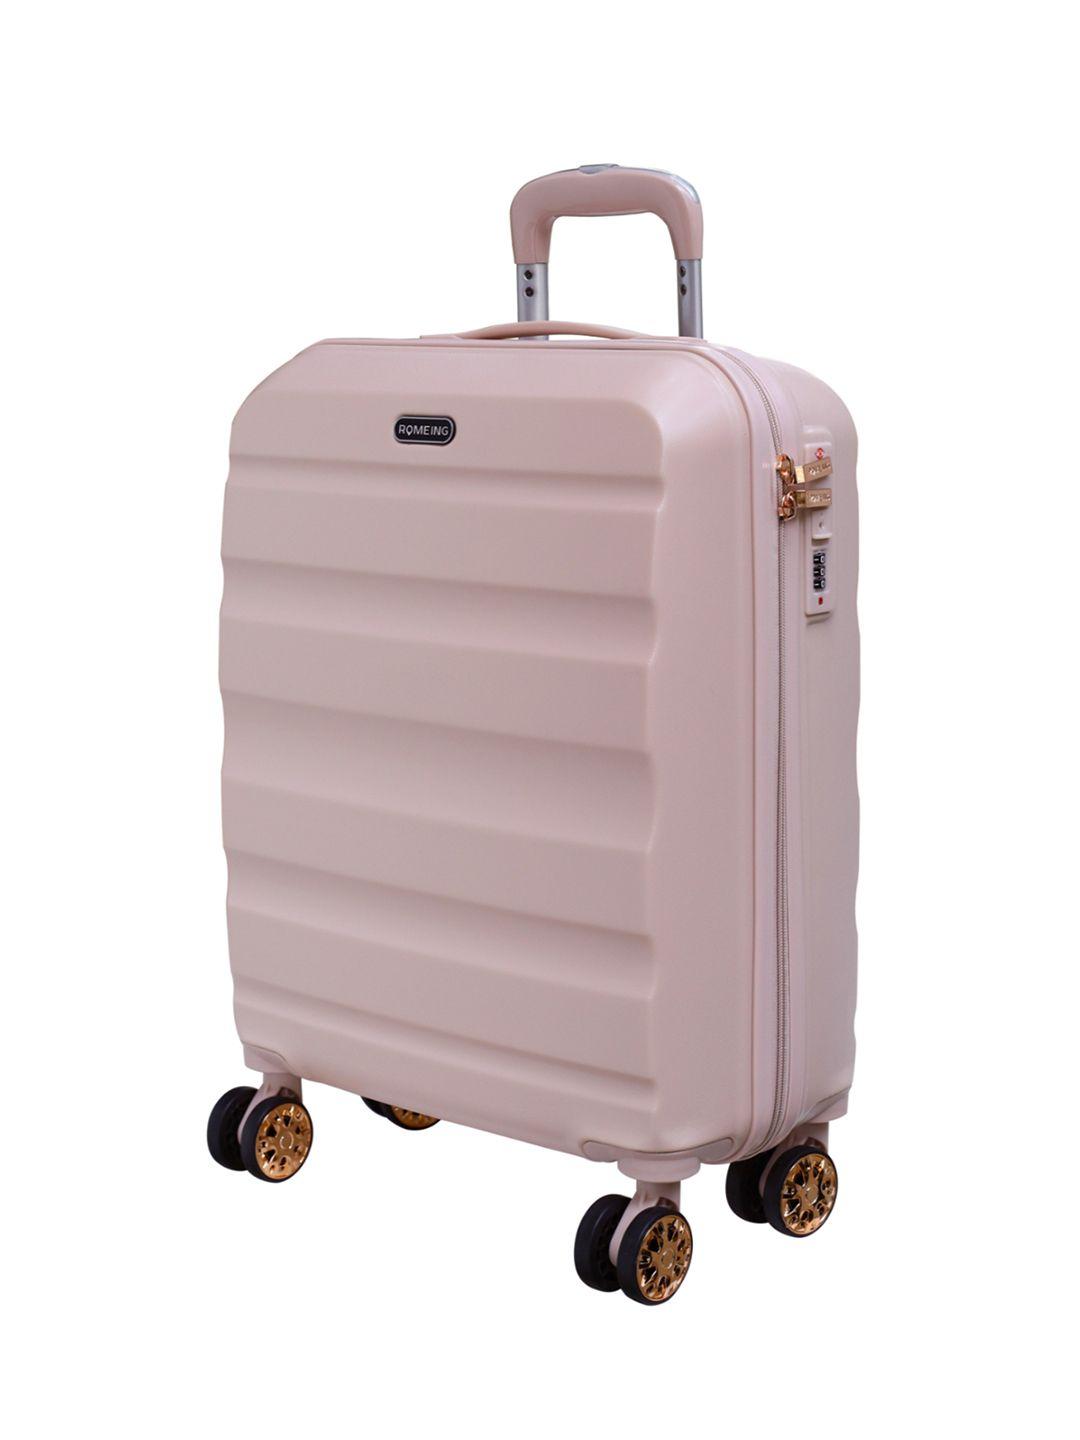 romeing venice pink textured hard-sided polycarbonate cabin trolley suitcase